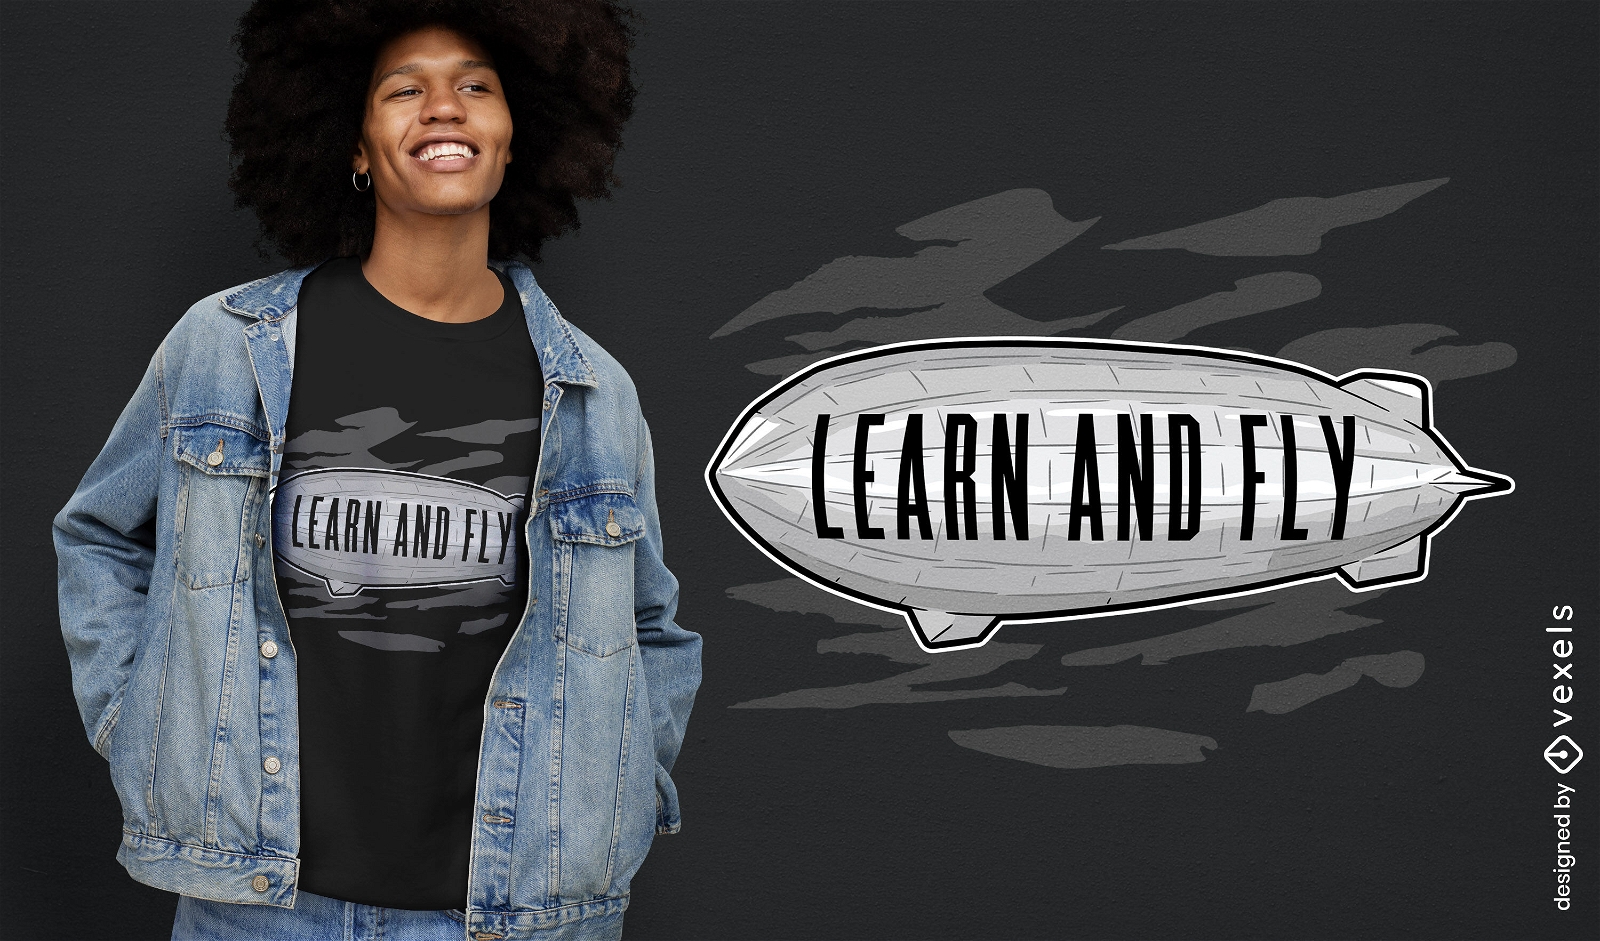 Learn and gly zeppelin t-shirt design